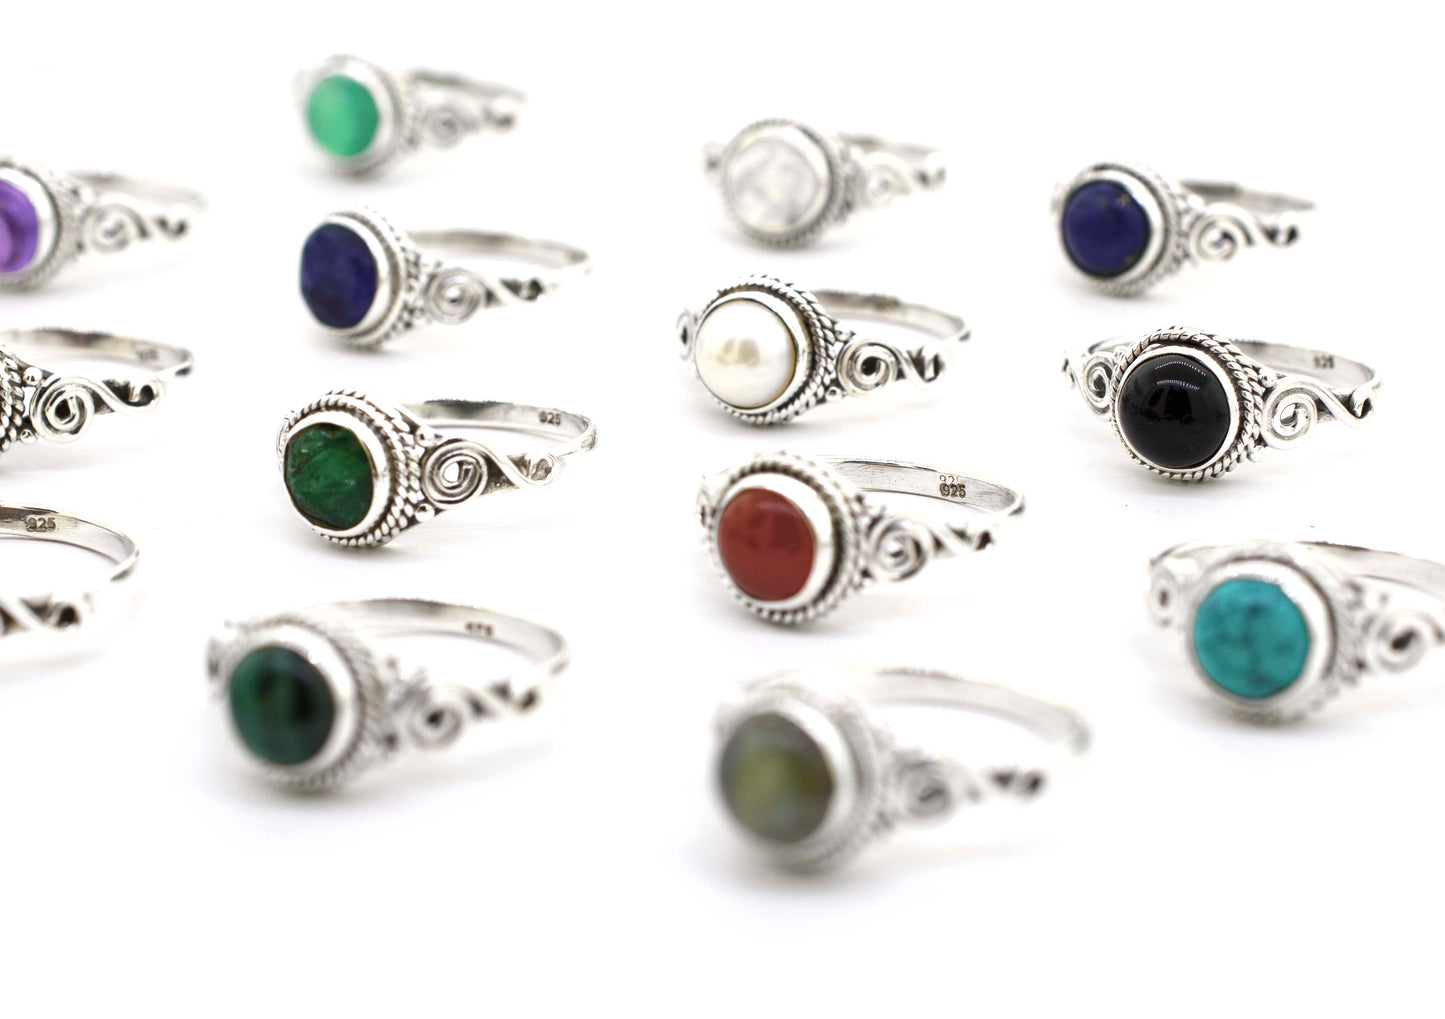 A boho-inspired Gemstone Circle Ring With Rope Border And Swirl Design featuring different colored stones.